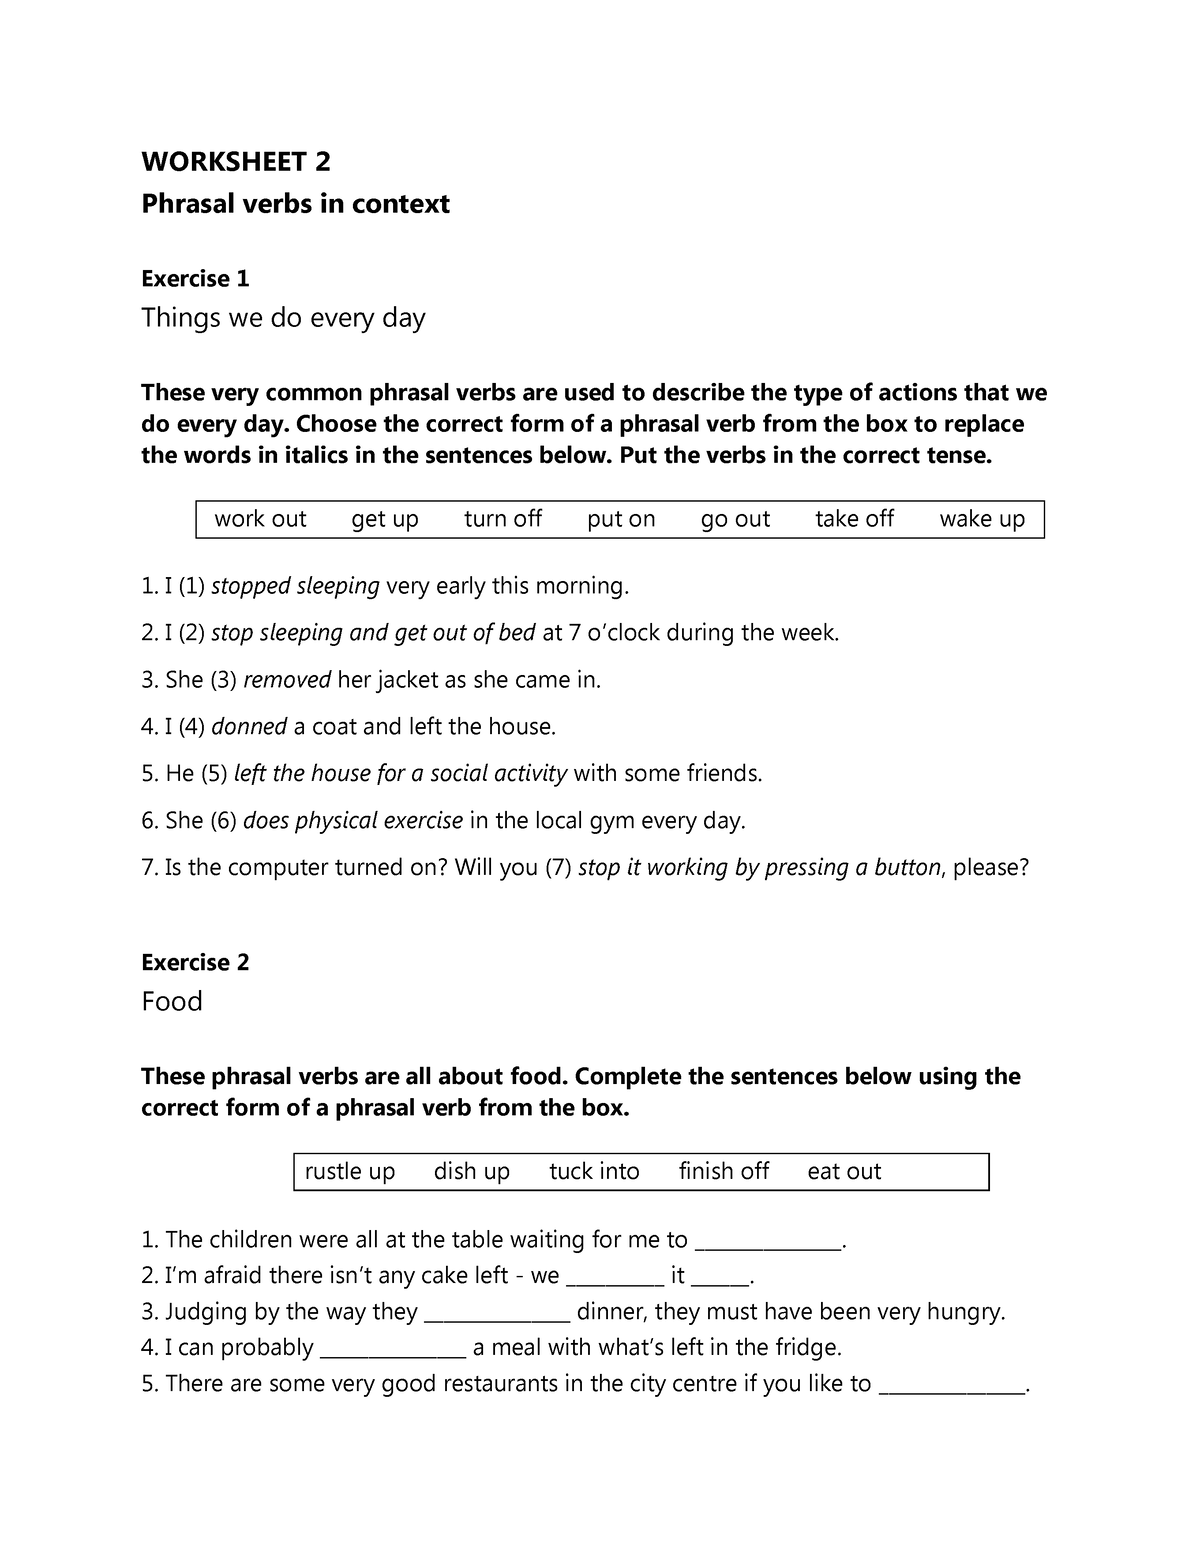 phrasal-verbs-worksheet-2-worksheet-2-phrasal-verbs-in-context